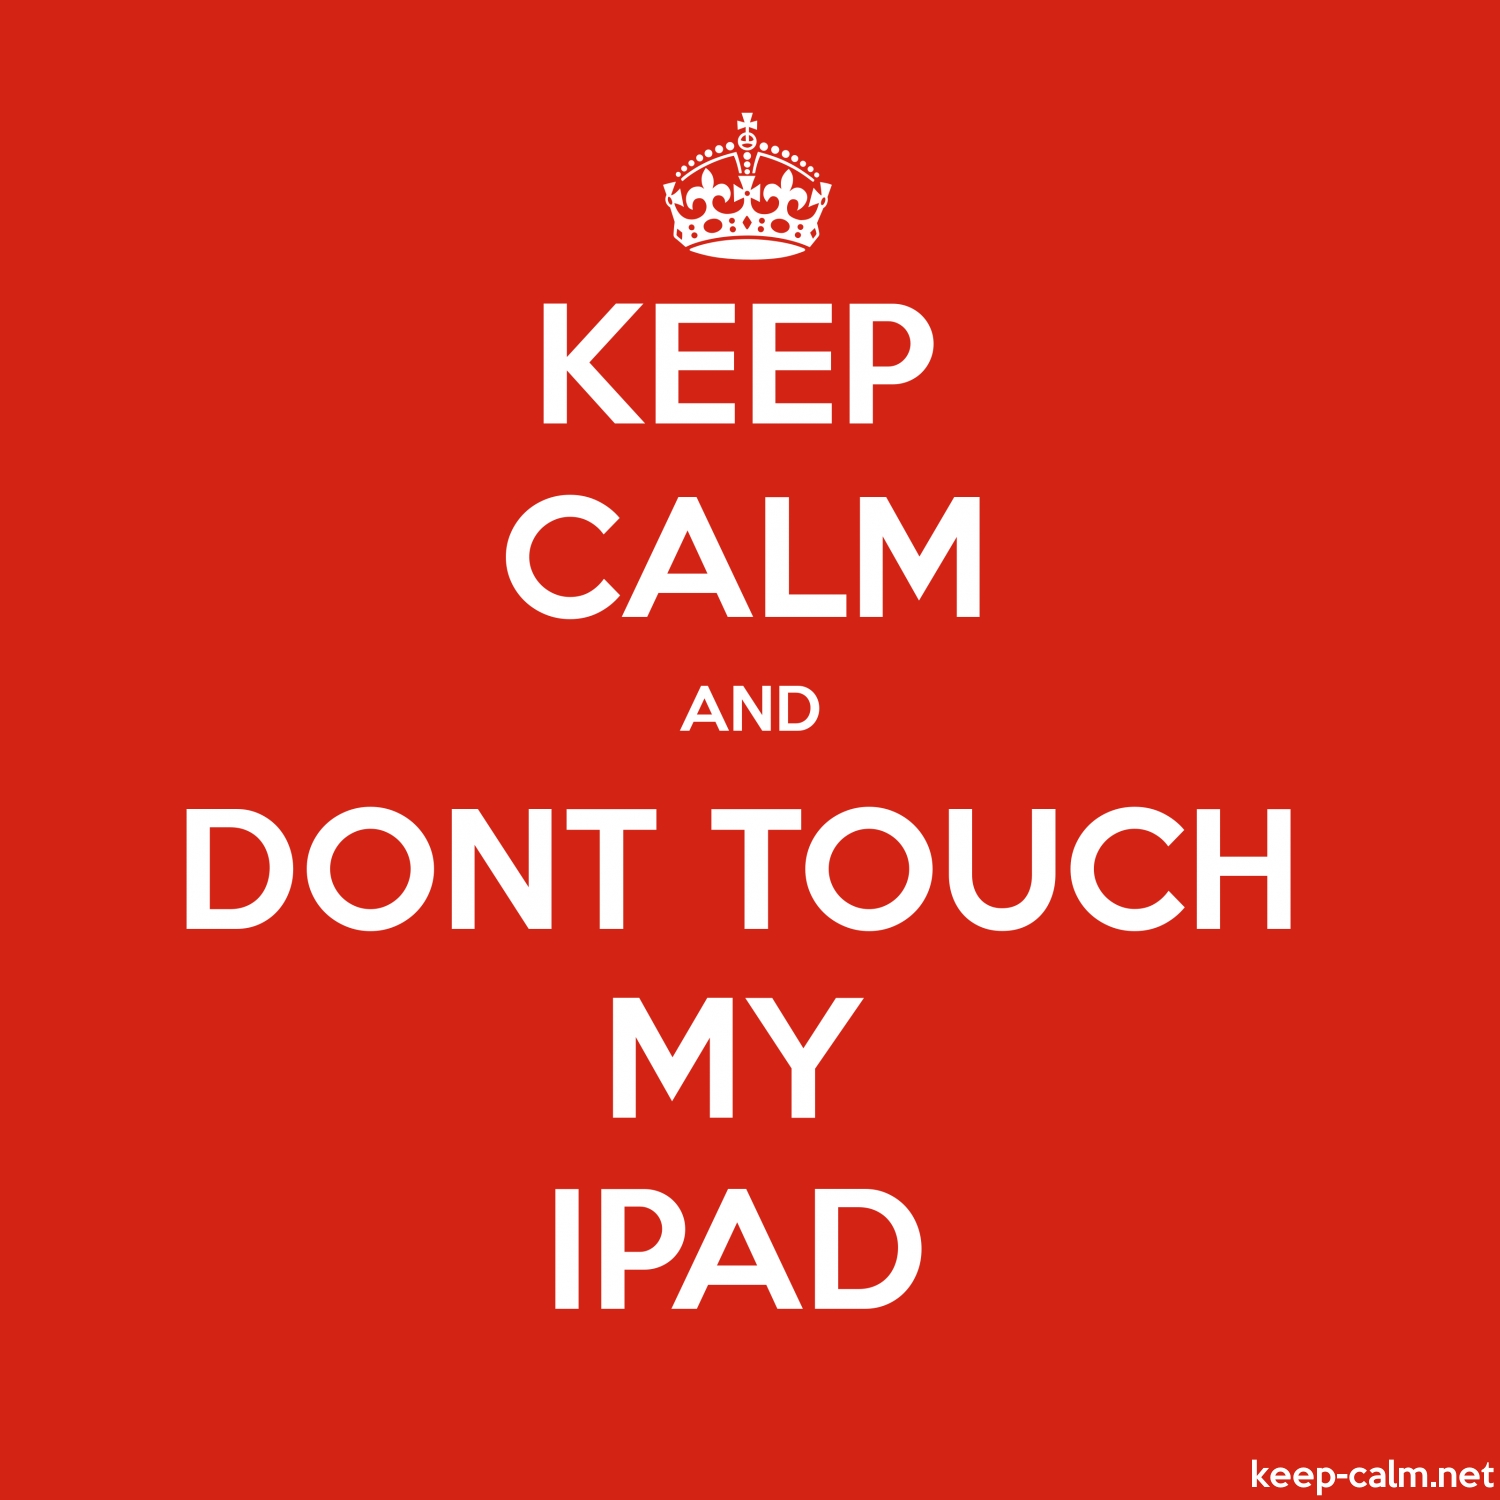 KEEP CALM AND DONT TOUCH MY IPAD